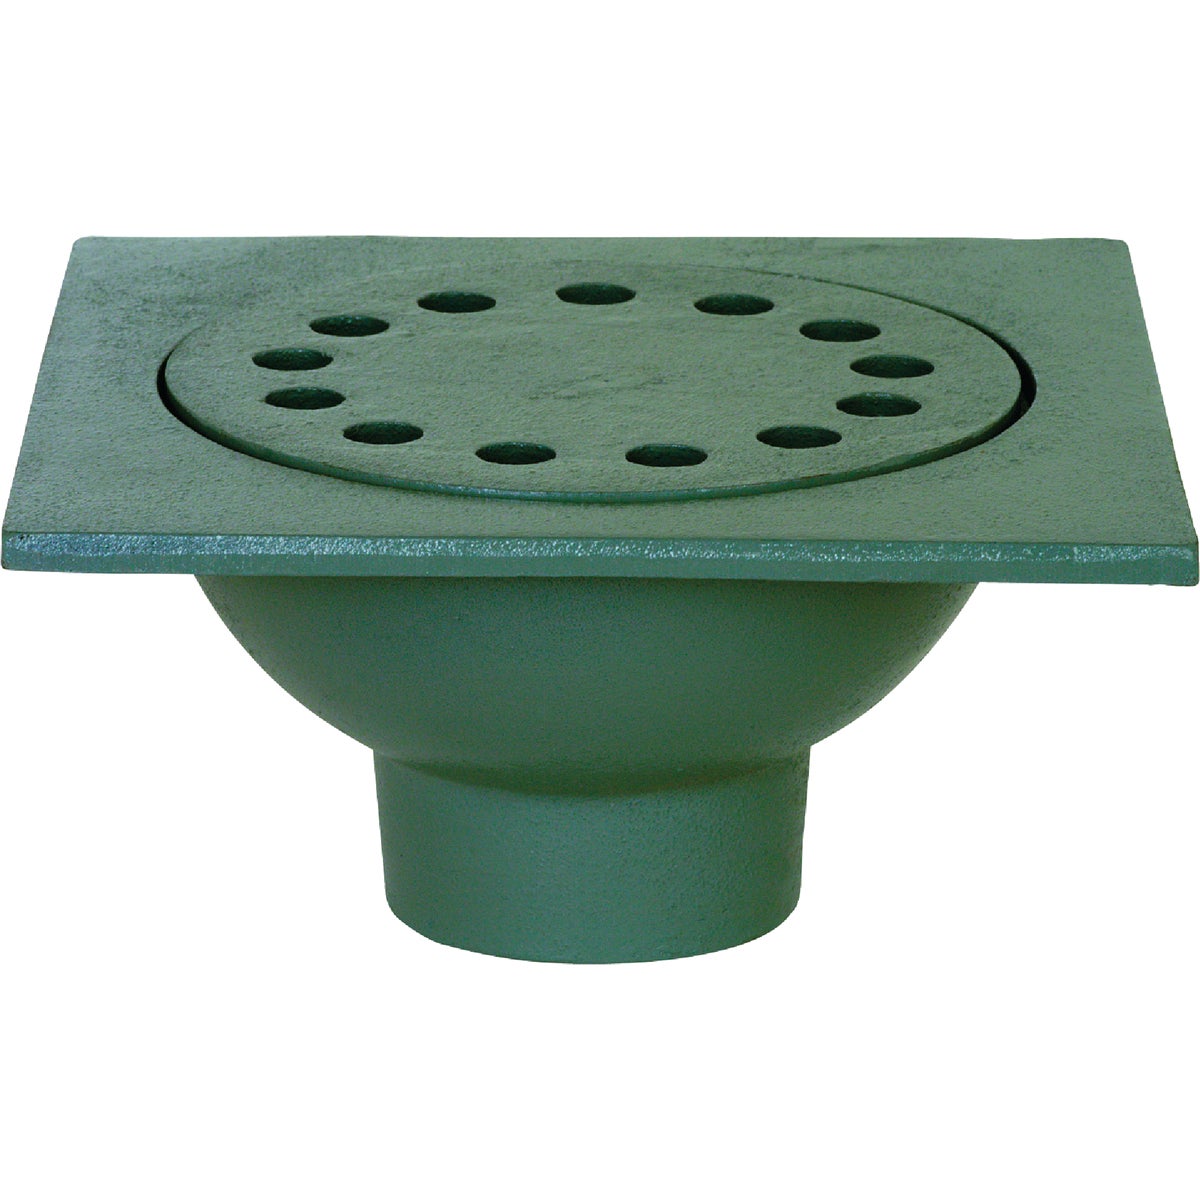 Sioux Chief 866-3I Sioux Chief Bell 9 In. Cast Iron Sewer and Drain Bell Trap 866-3I